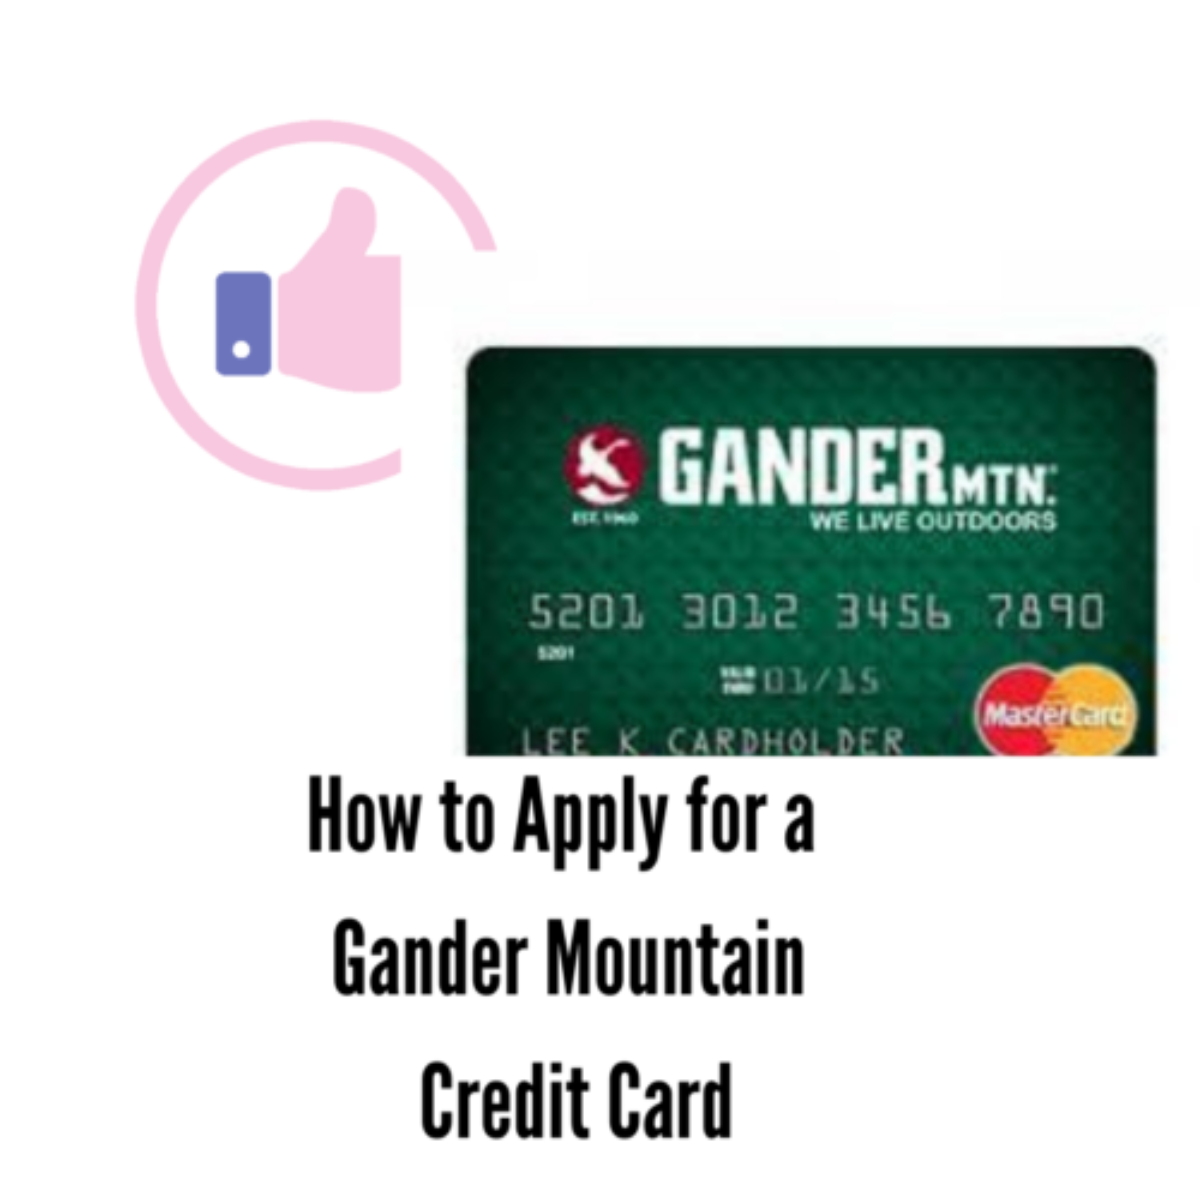 How To Apply For A Gander Mountain Credit Card - Every Extra Dollar